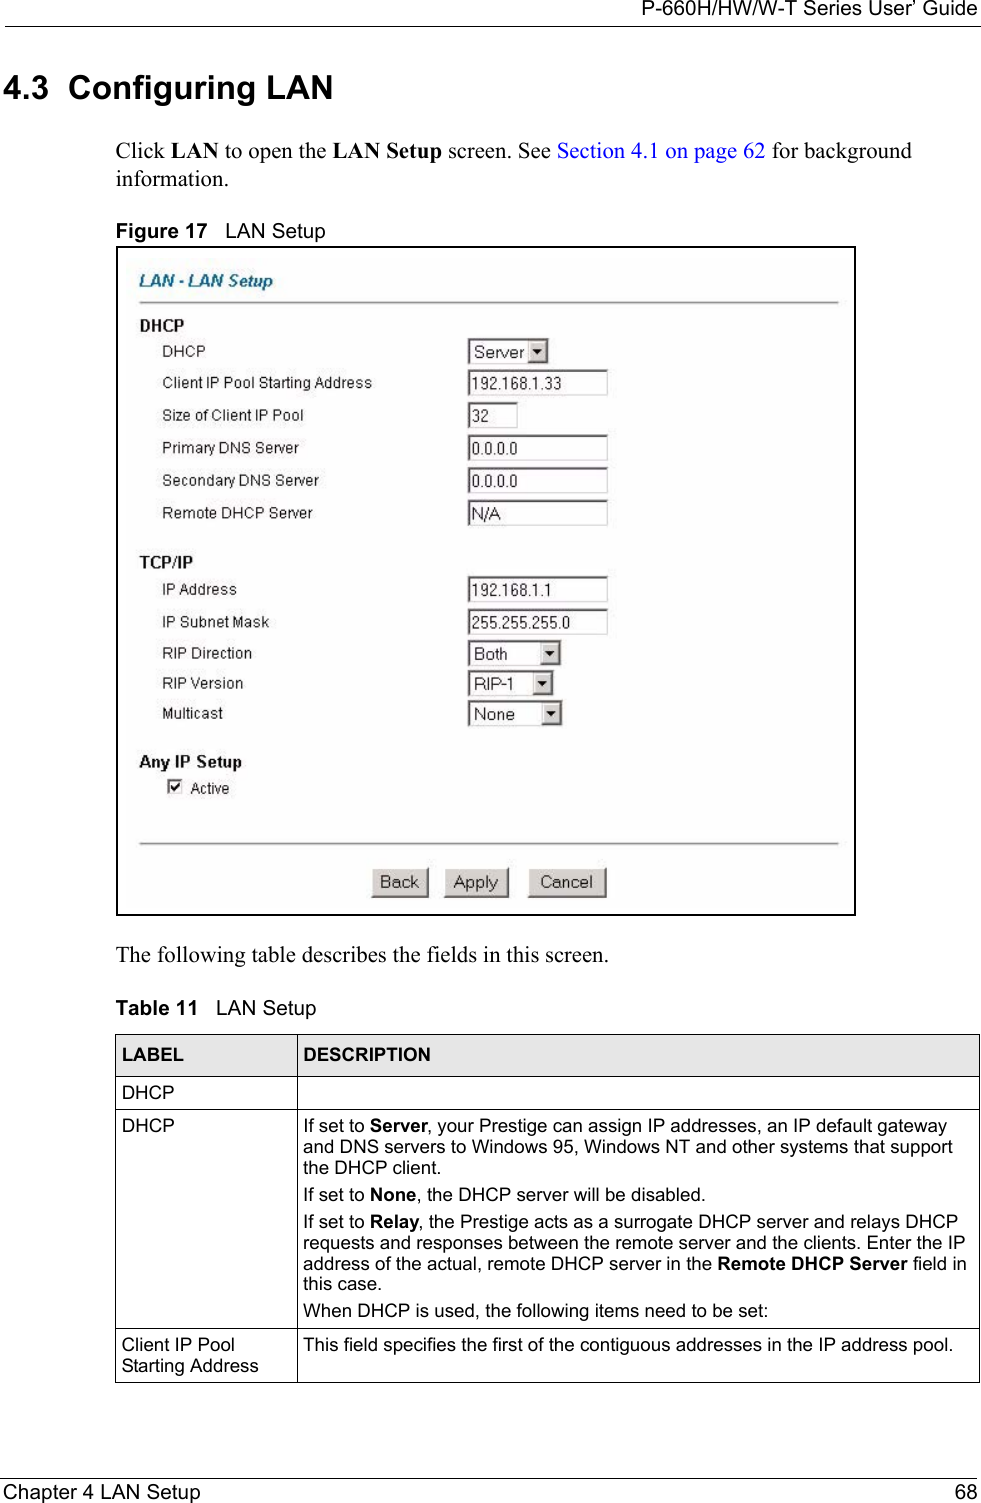 P-660H/HW/W-T Series User’ GuideChapter 4 LAN Setup 684.3  Configuring LAN Click LAN to open the LAN Setup screen. See Section 4.1 on page 62 for background information. Figure 17   LAN SetupThe following table describes the fields in this screen.  Table 11   LAN SetupLABEL DESCRIPTIONDHCPDHCP If set to Server, your Prestige can assign IP addresses, an IP default gateway and DNS servers to Windows 95, Windows NT and other systems that support the DHCP client.If set to None, the DHCP server will be disabled. If set to Relay, the Prestige acts as a surrogate DHCP server and relays DHCP requests and responses between the remote server and the clients. Enter the IP address of the actual, remote DHCP server in the Remote DHCP Server field in this case. When DHCP is used, the following items need to be set: Client IP Pool Starting AddressThis field specifies the first of the contiguous addresses in the IP address pool.